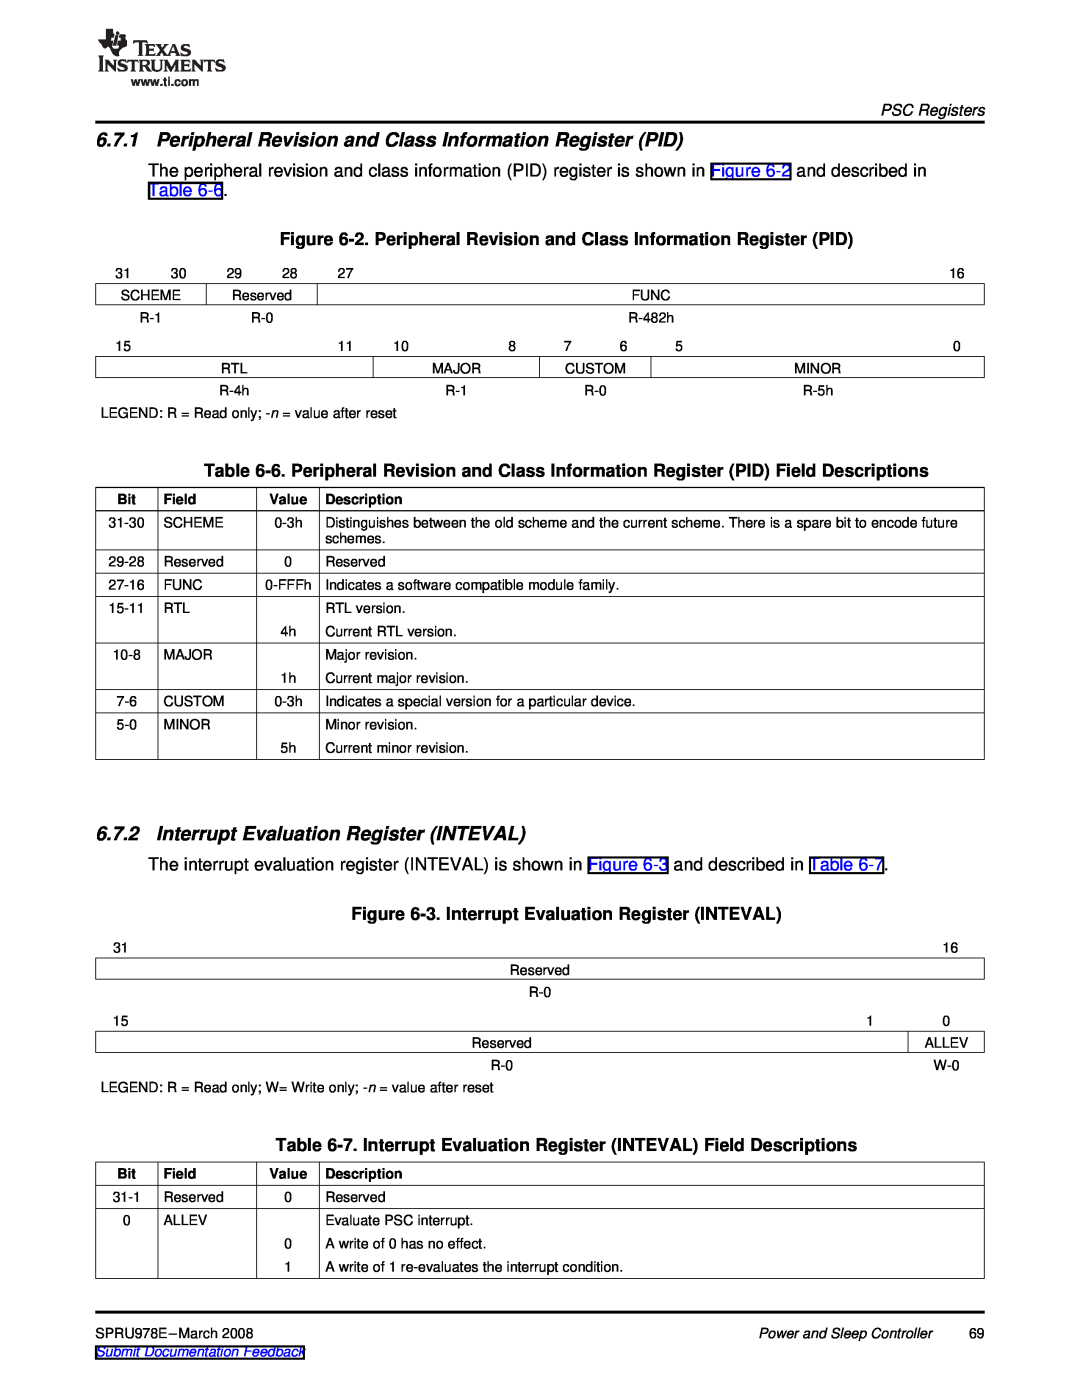 Texas Instruments TMS320DM643x manual Peripheral Revision and Class Information Register PID 